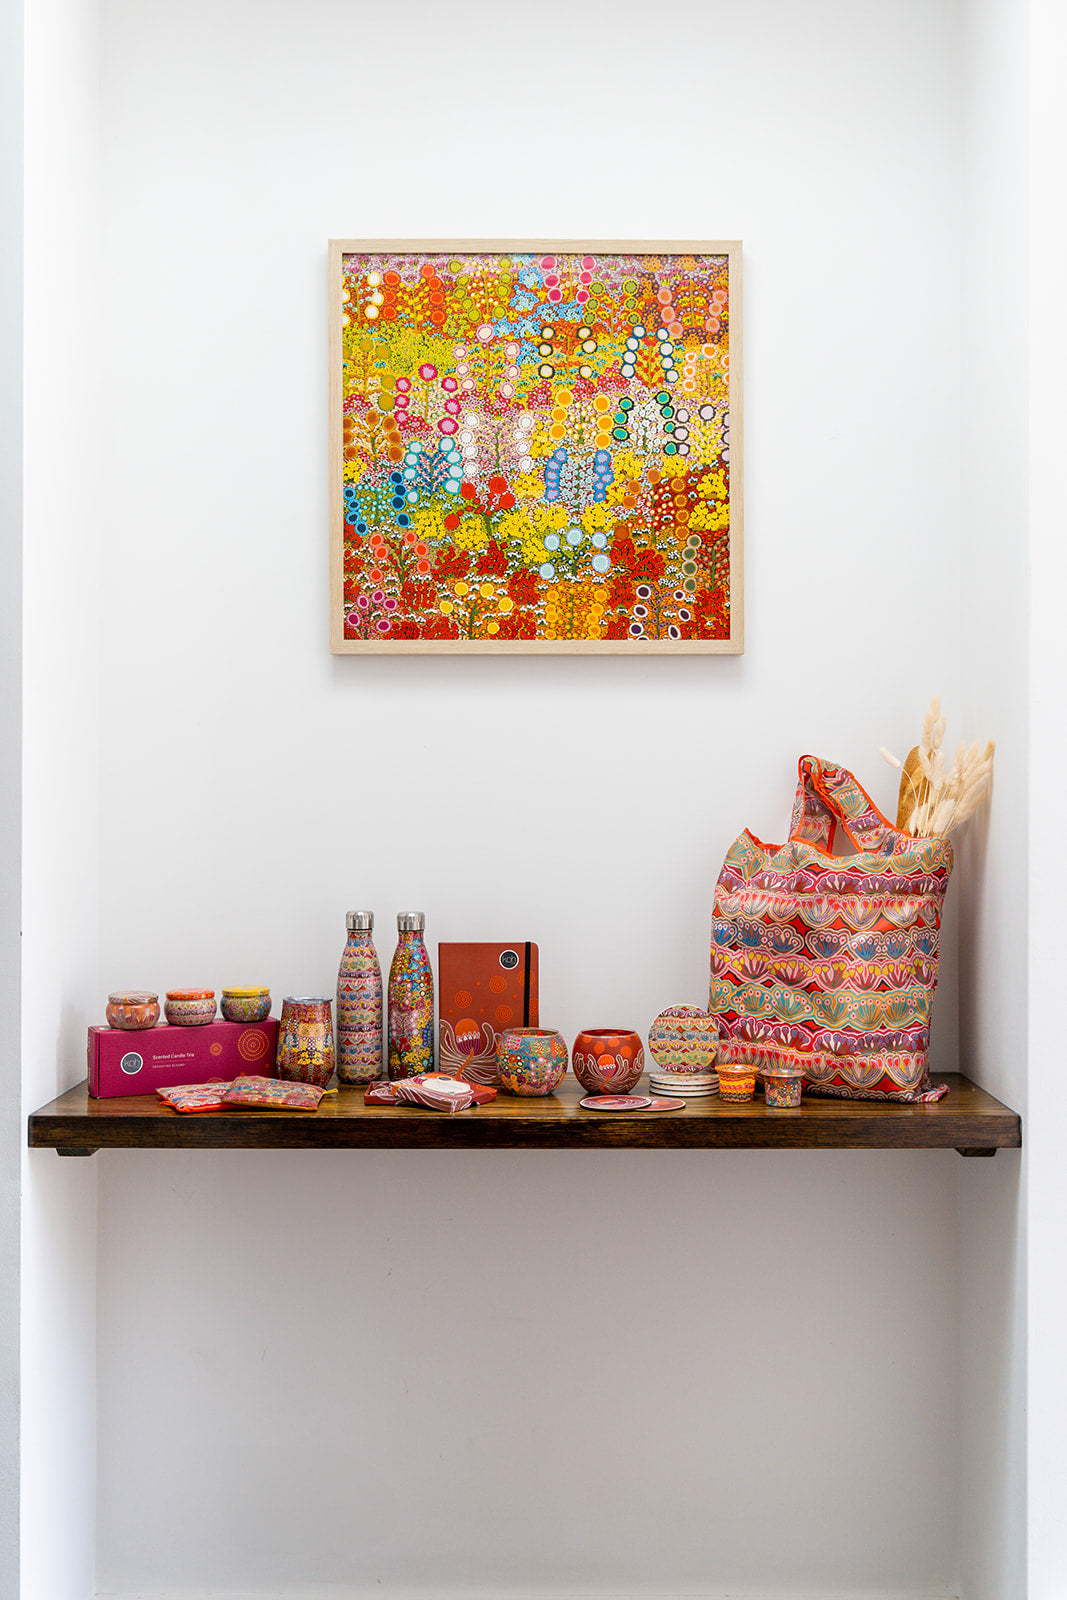 gift ideas for mother's day from Koh living with stunning designer Aboriginal art gifts